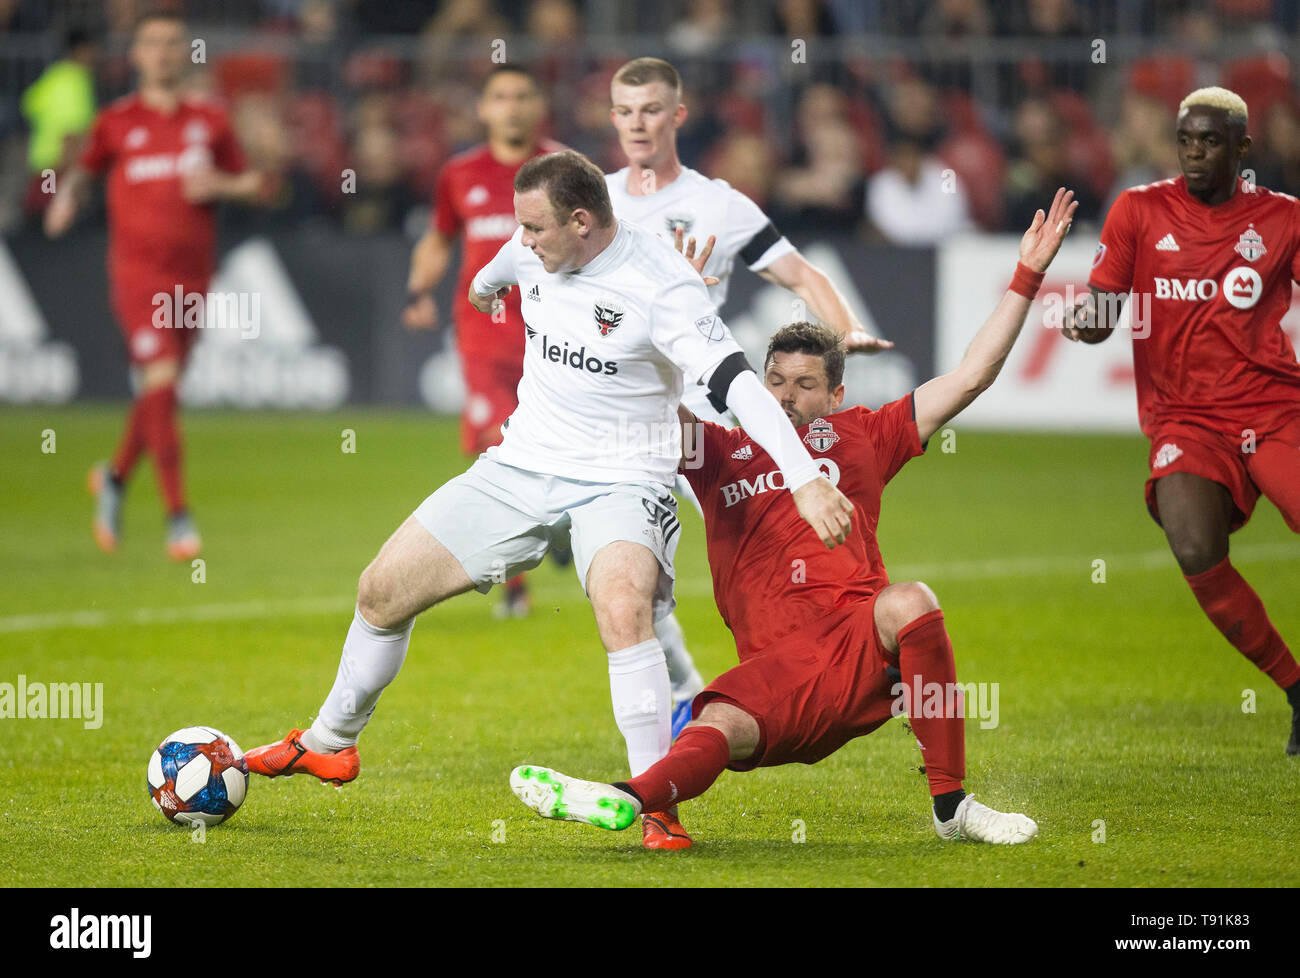 Toronto, Canada. 15th May, 2019. Drew Moor (2nd R) of Toronto FC vies with Wayne Rooney of D.C. United during their 2019 Major League Soccer (MLS) match at BMO Field in Toronto, Canada, May 15, 2019. Credit: Zou Zheng/Xinhua/Alamy Live News Stock Photo